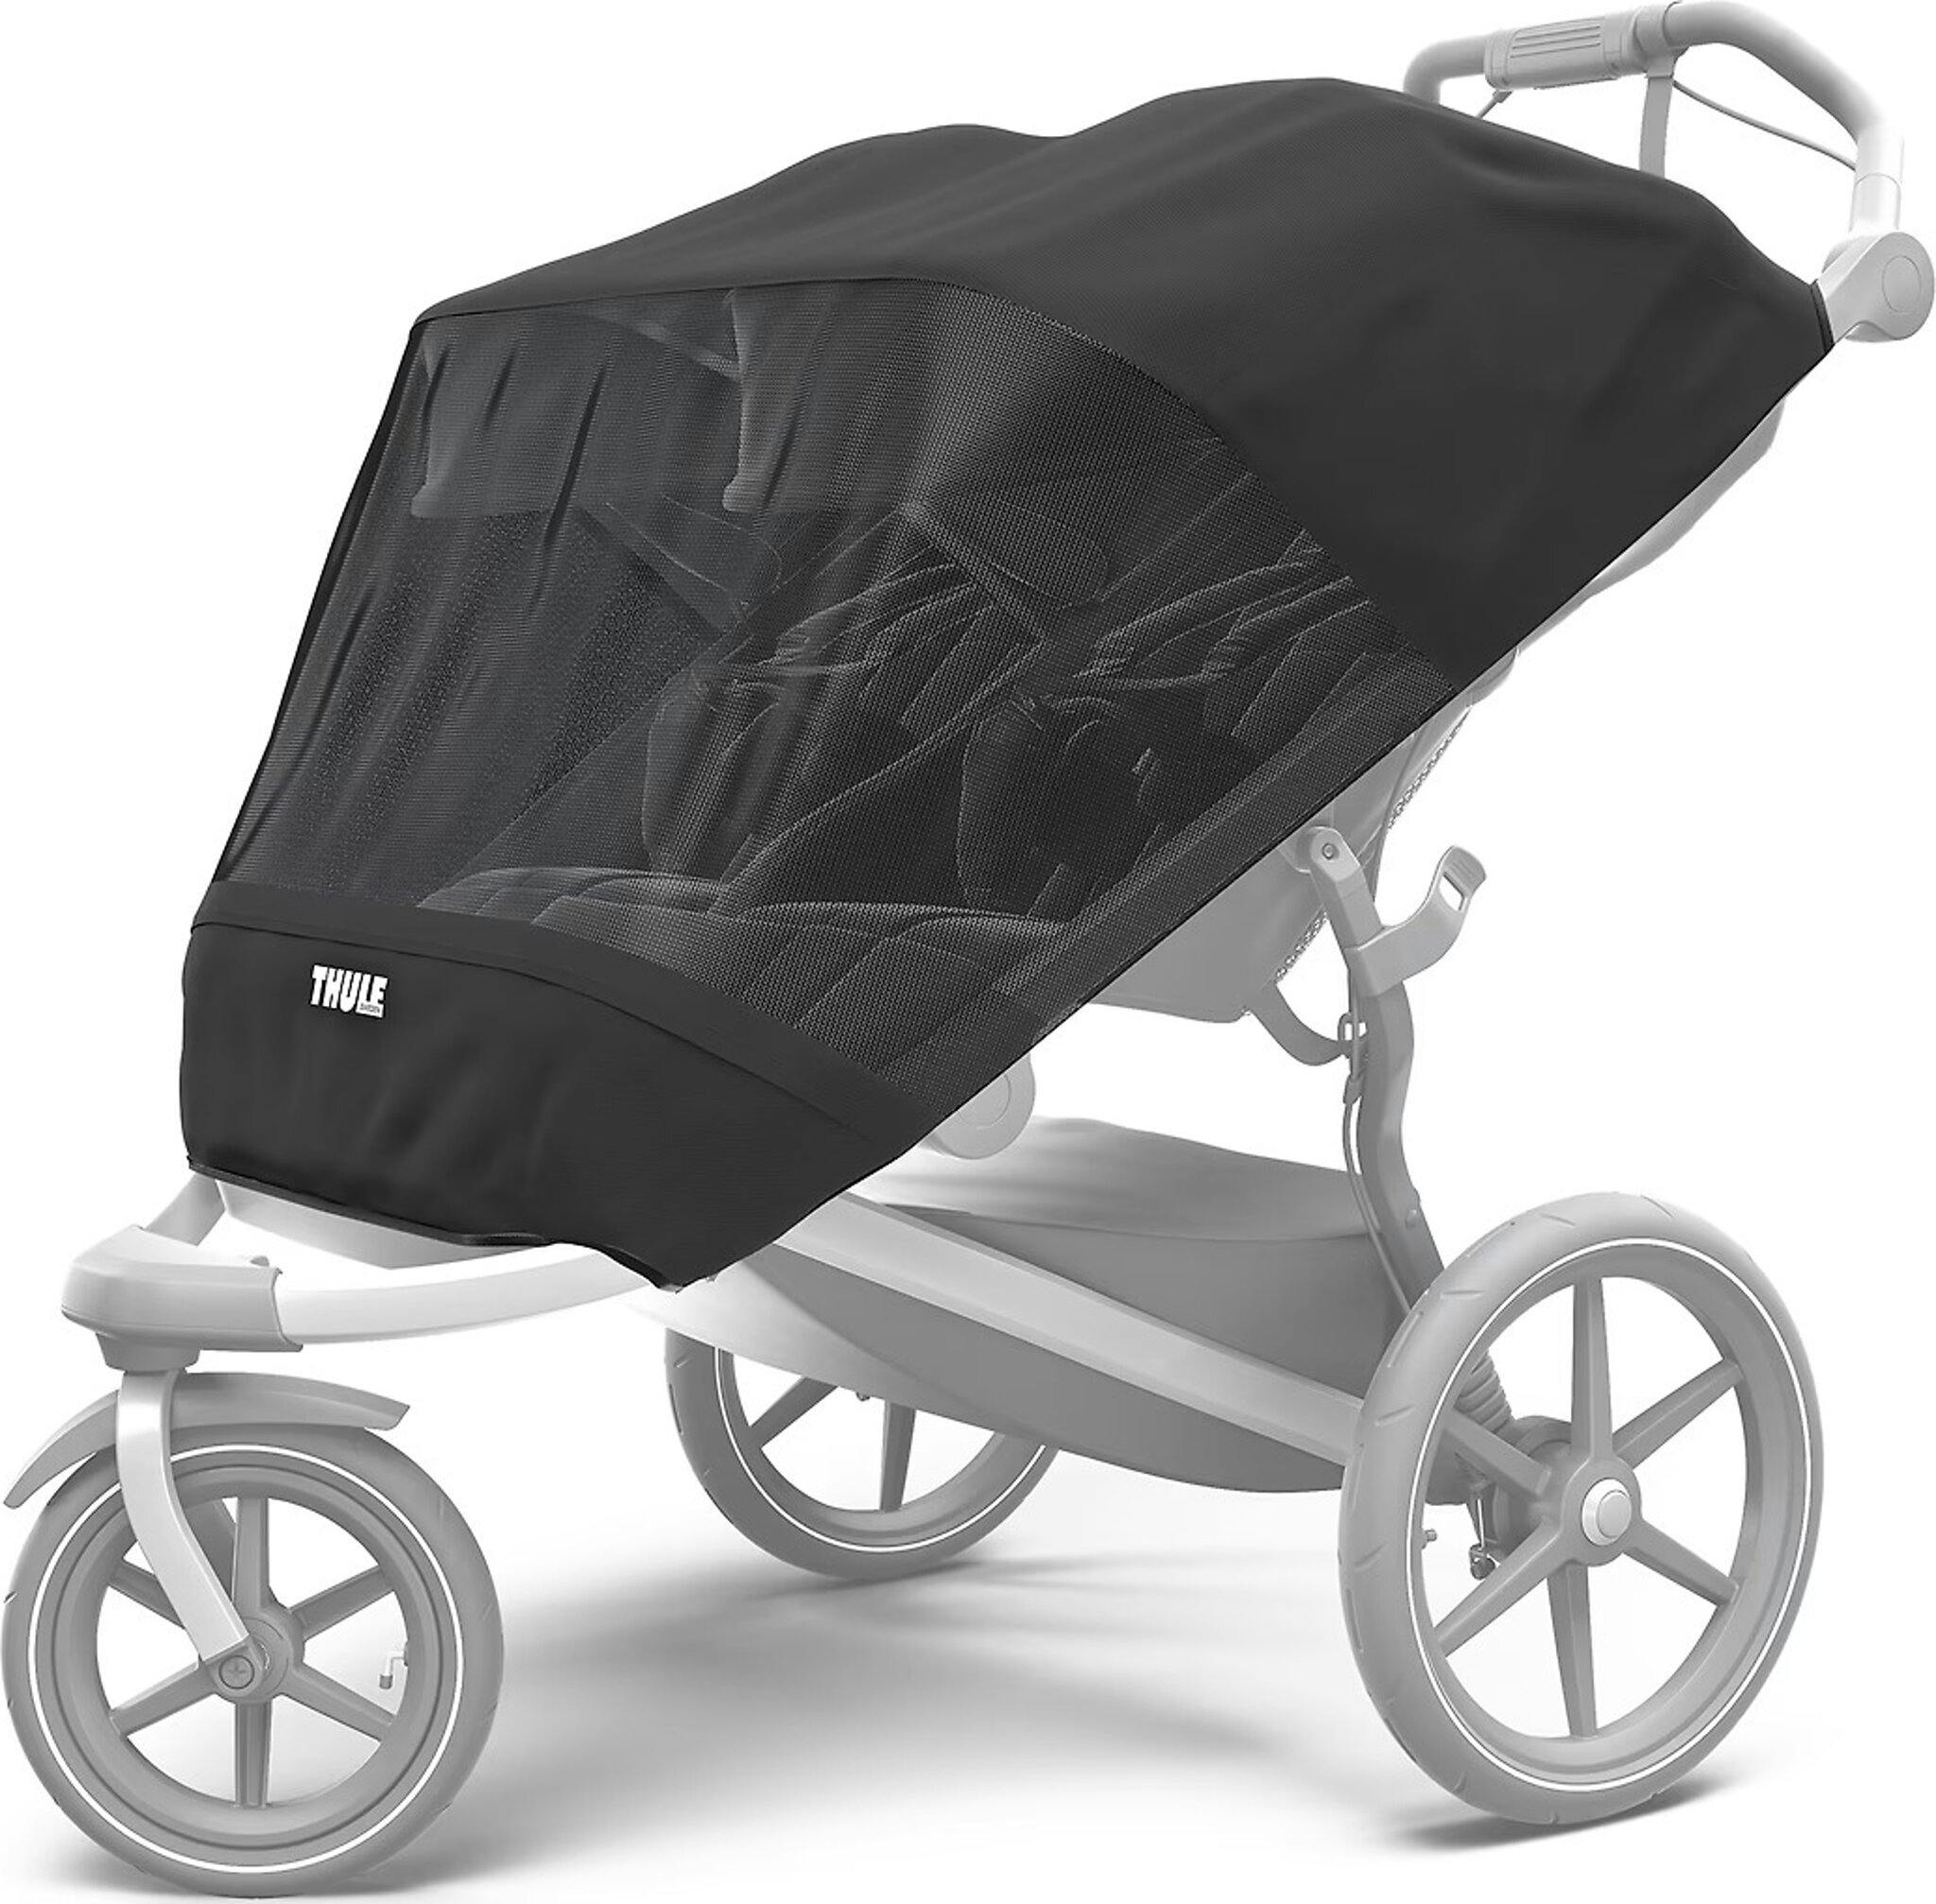 Product image for Thule Urban Glide 2 Double Stroller Mesh Cover